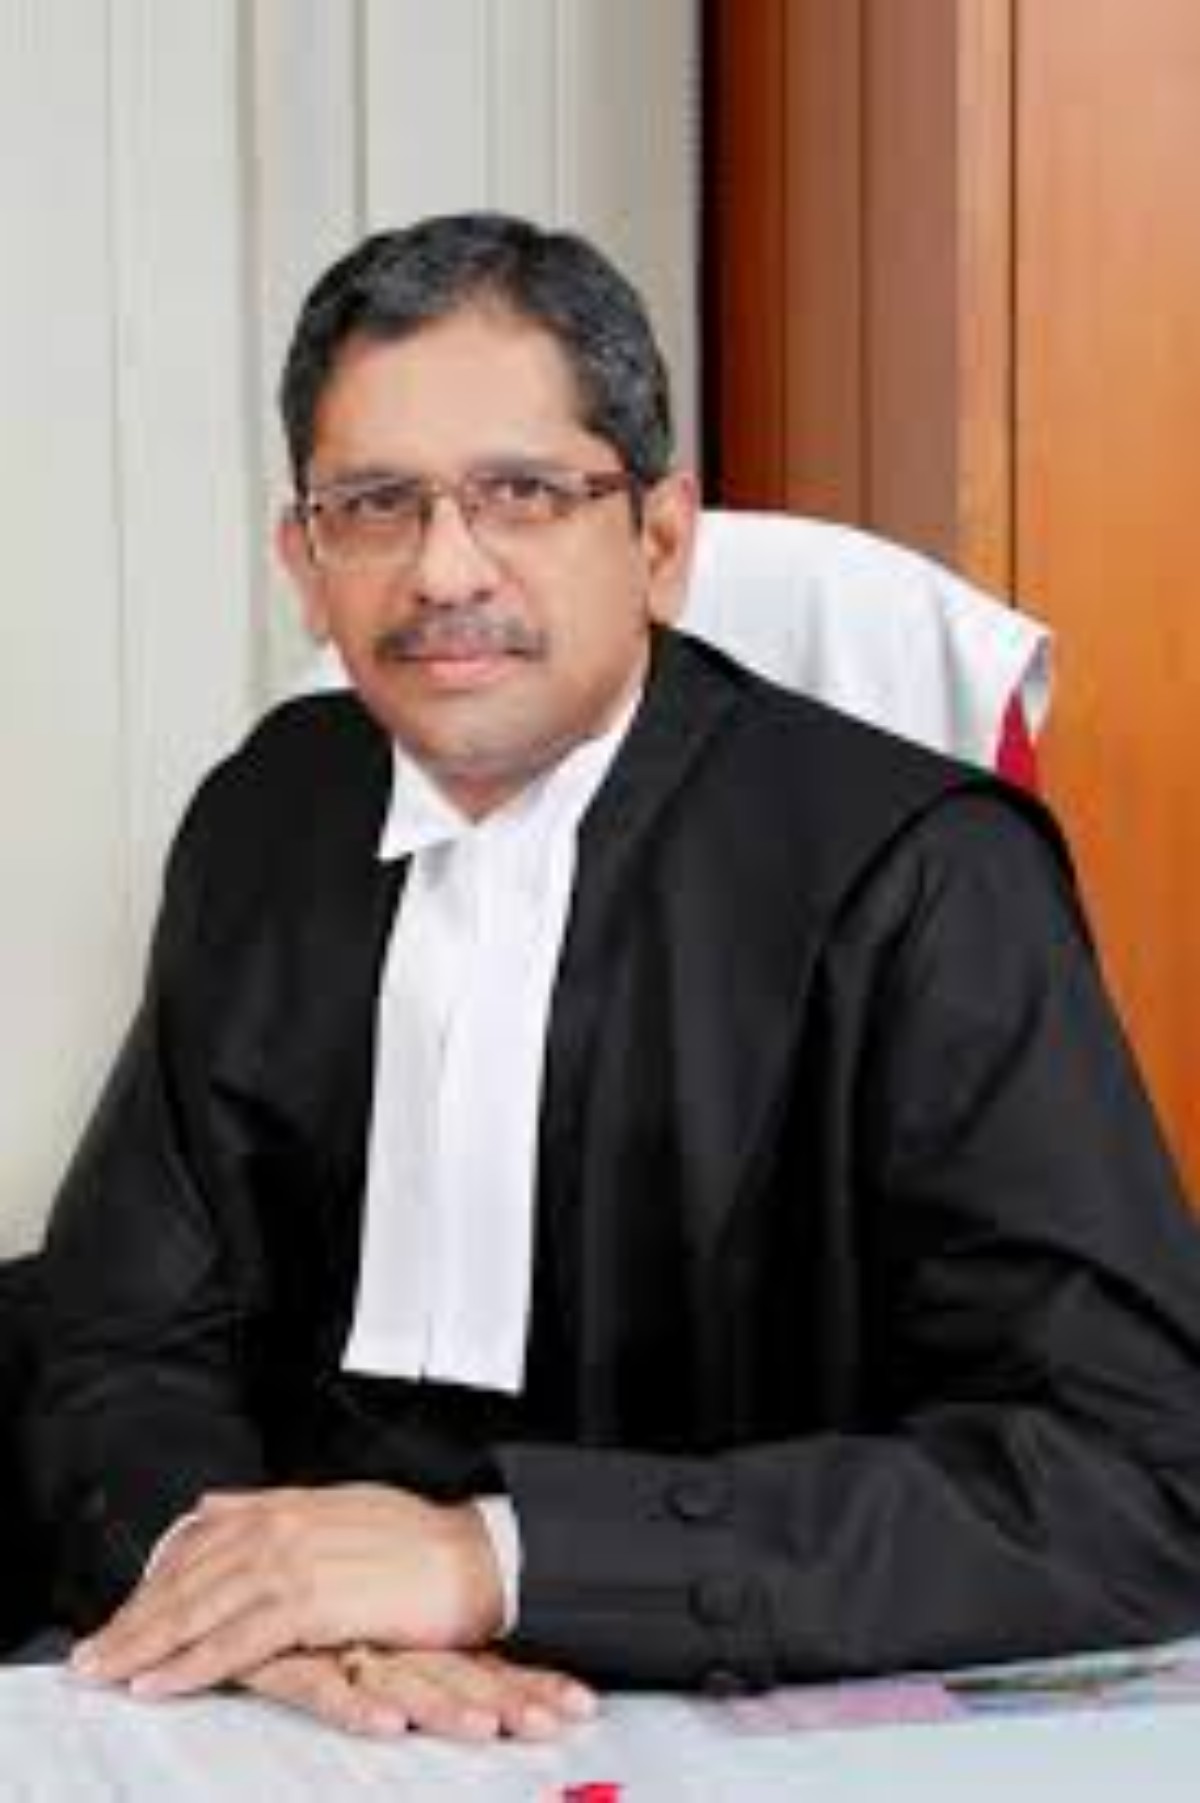 Court have an important role in realizing the full potential of the ADR Mechanism’: Justice NV Ramana